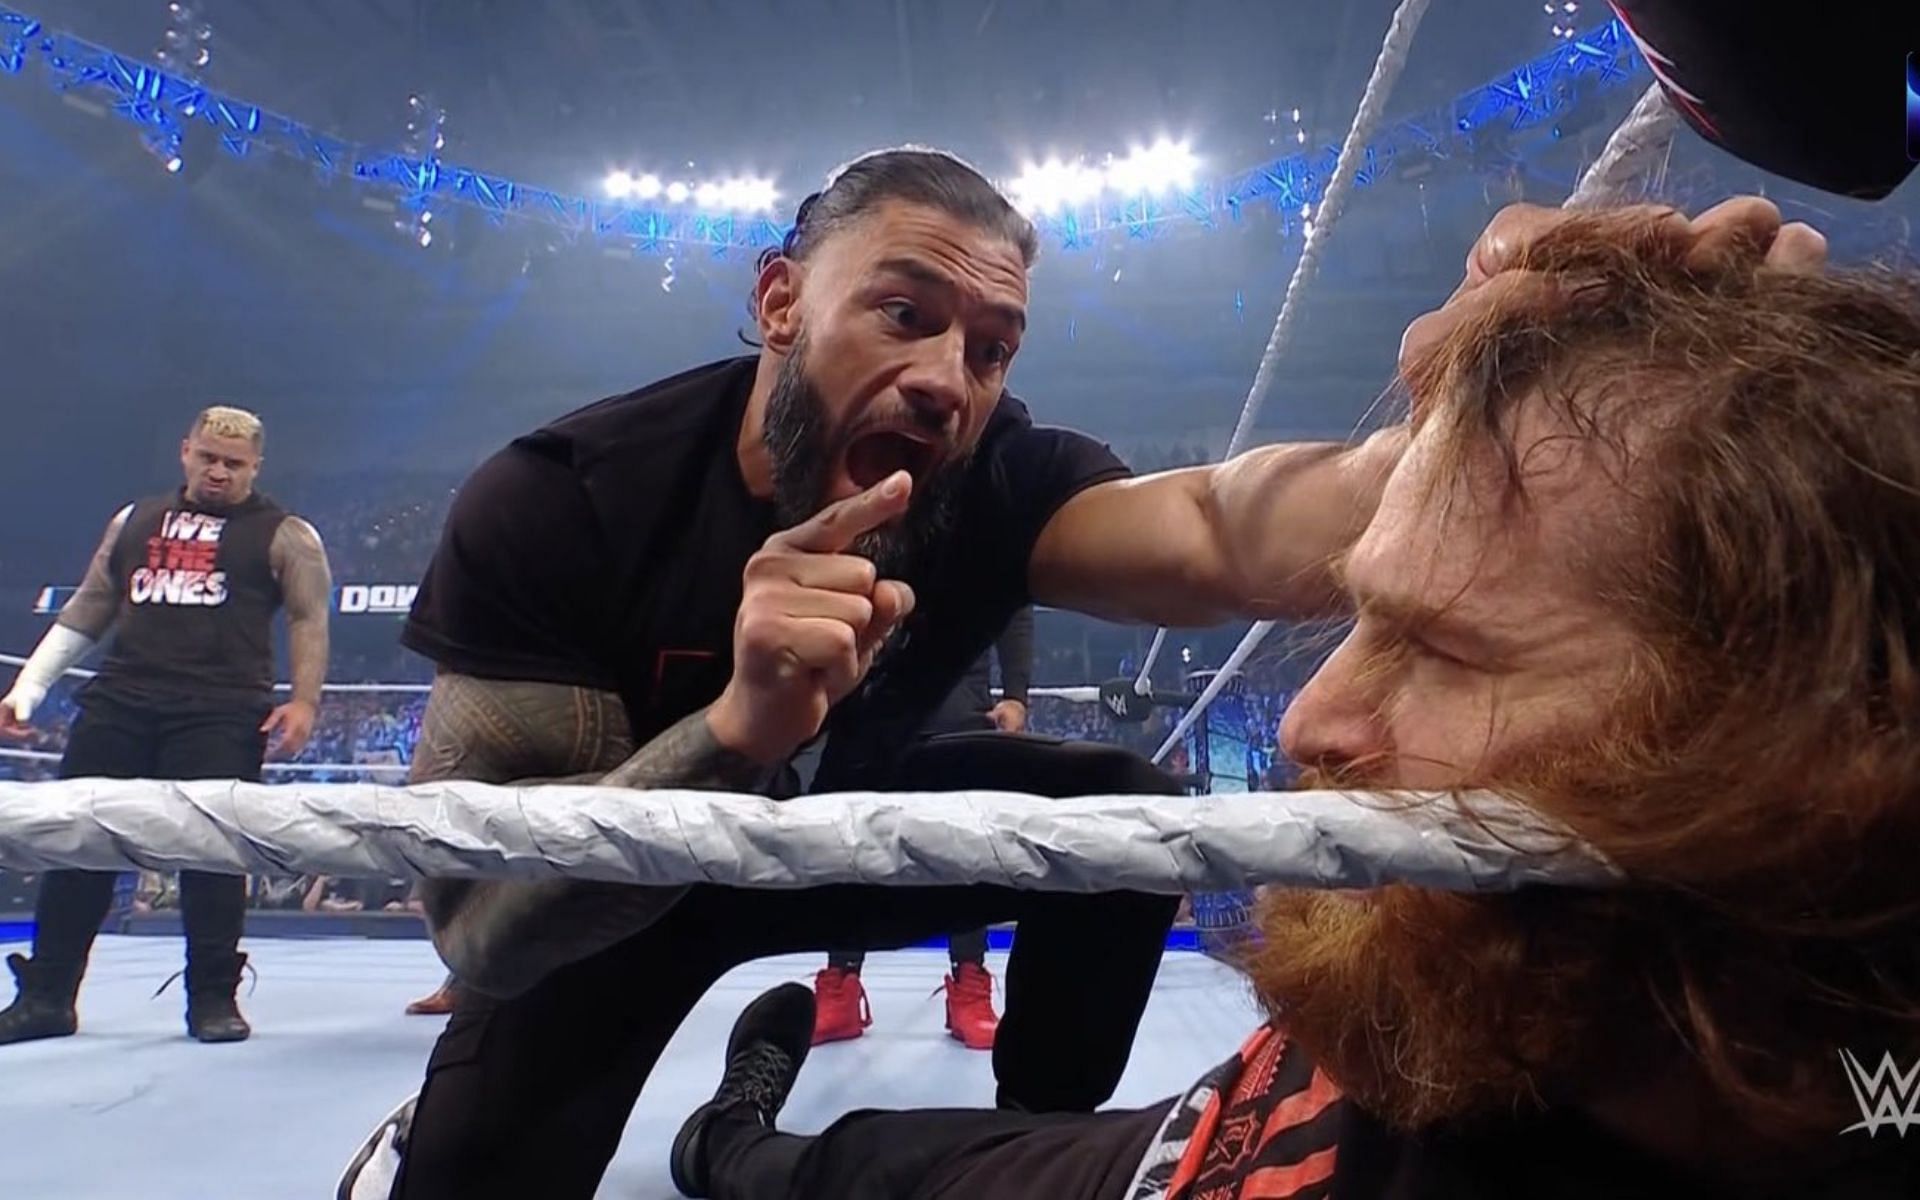 Roman Reigns sent a message to Sami Zayn on SmackDown